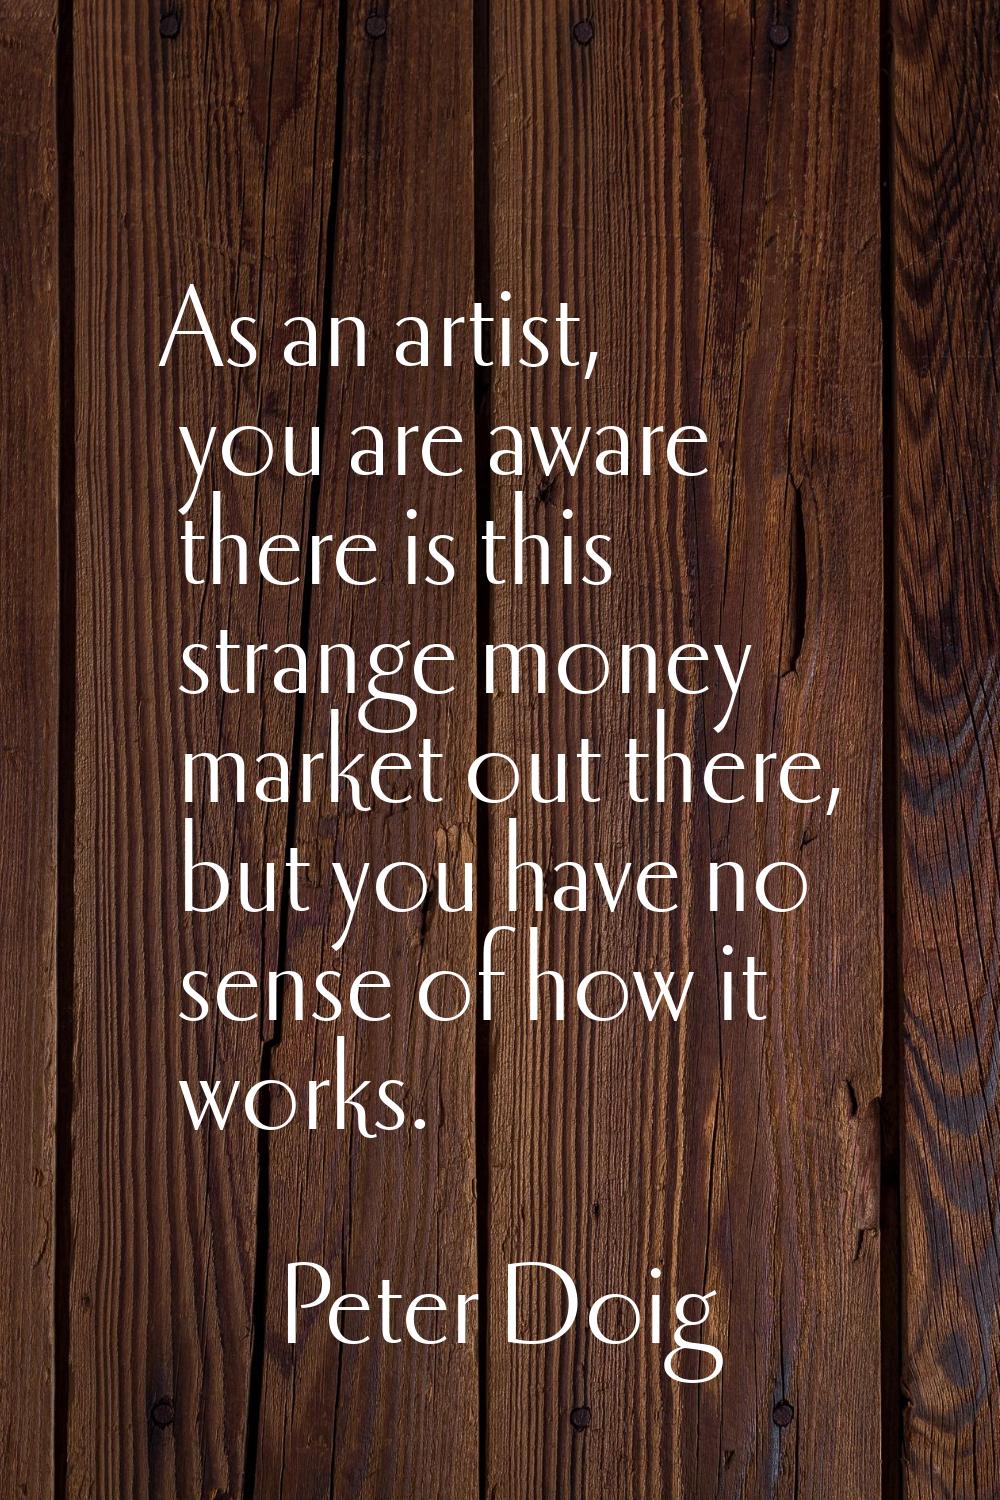 As an artist, you are aware there is this strange money market out there, but you have no sense of 